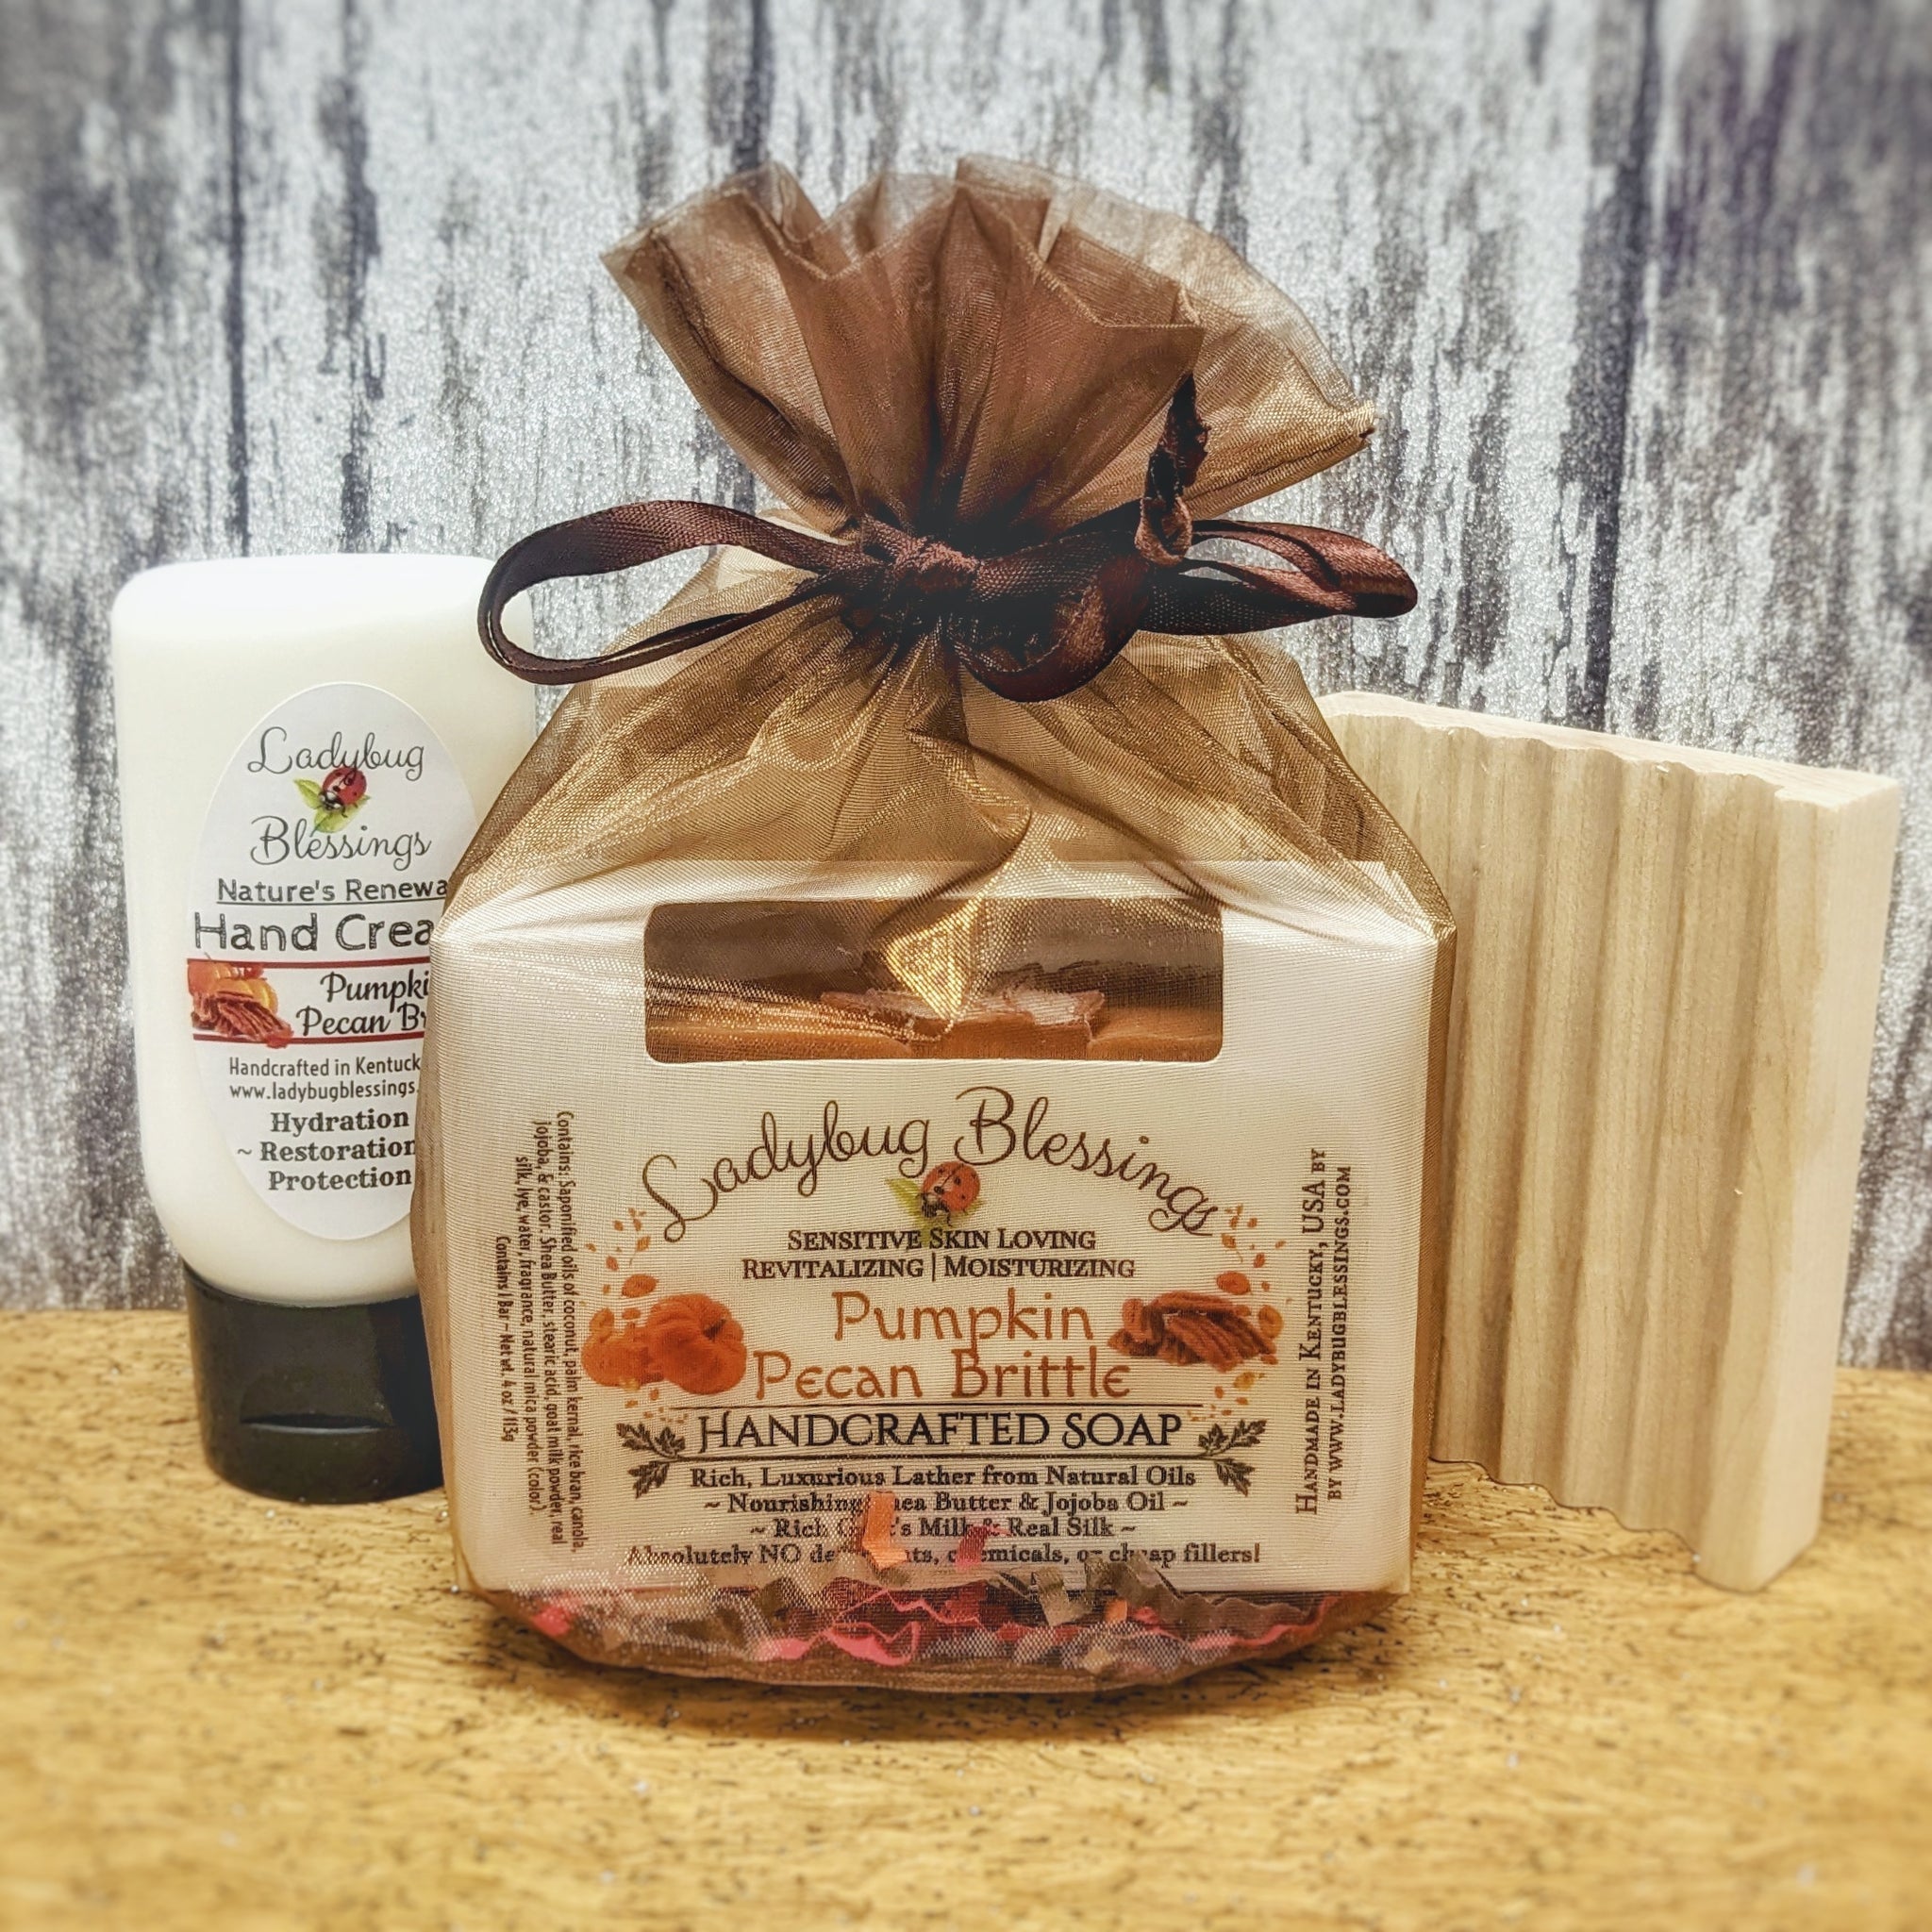 *NEW* Handcrafted Soap, Hand Cream, & Wooden Soap Dish Set